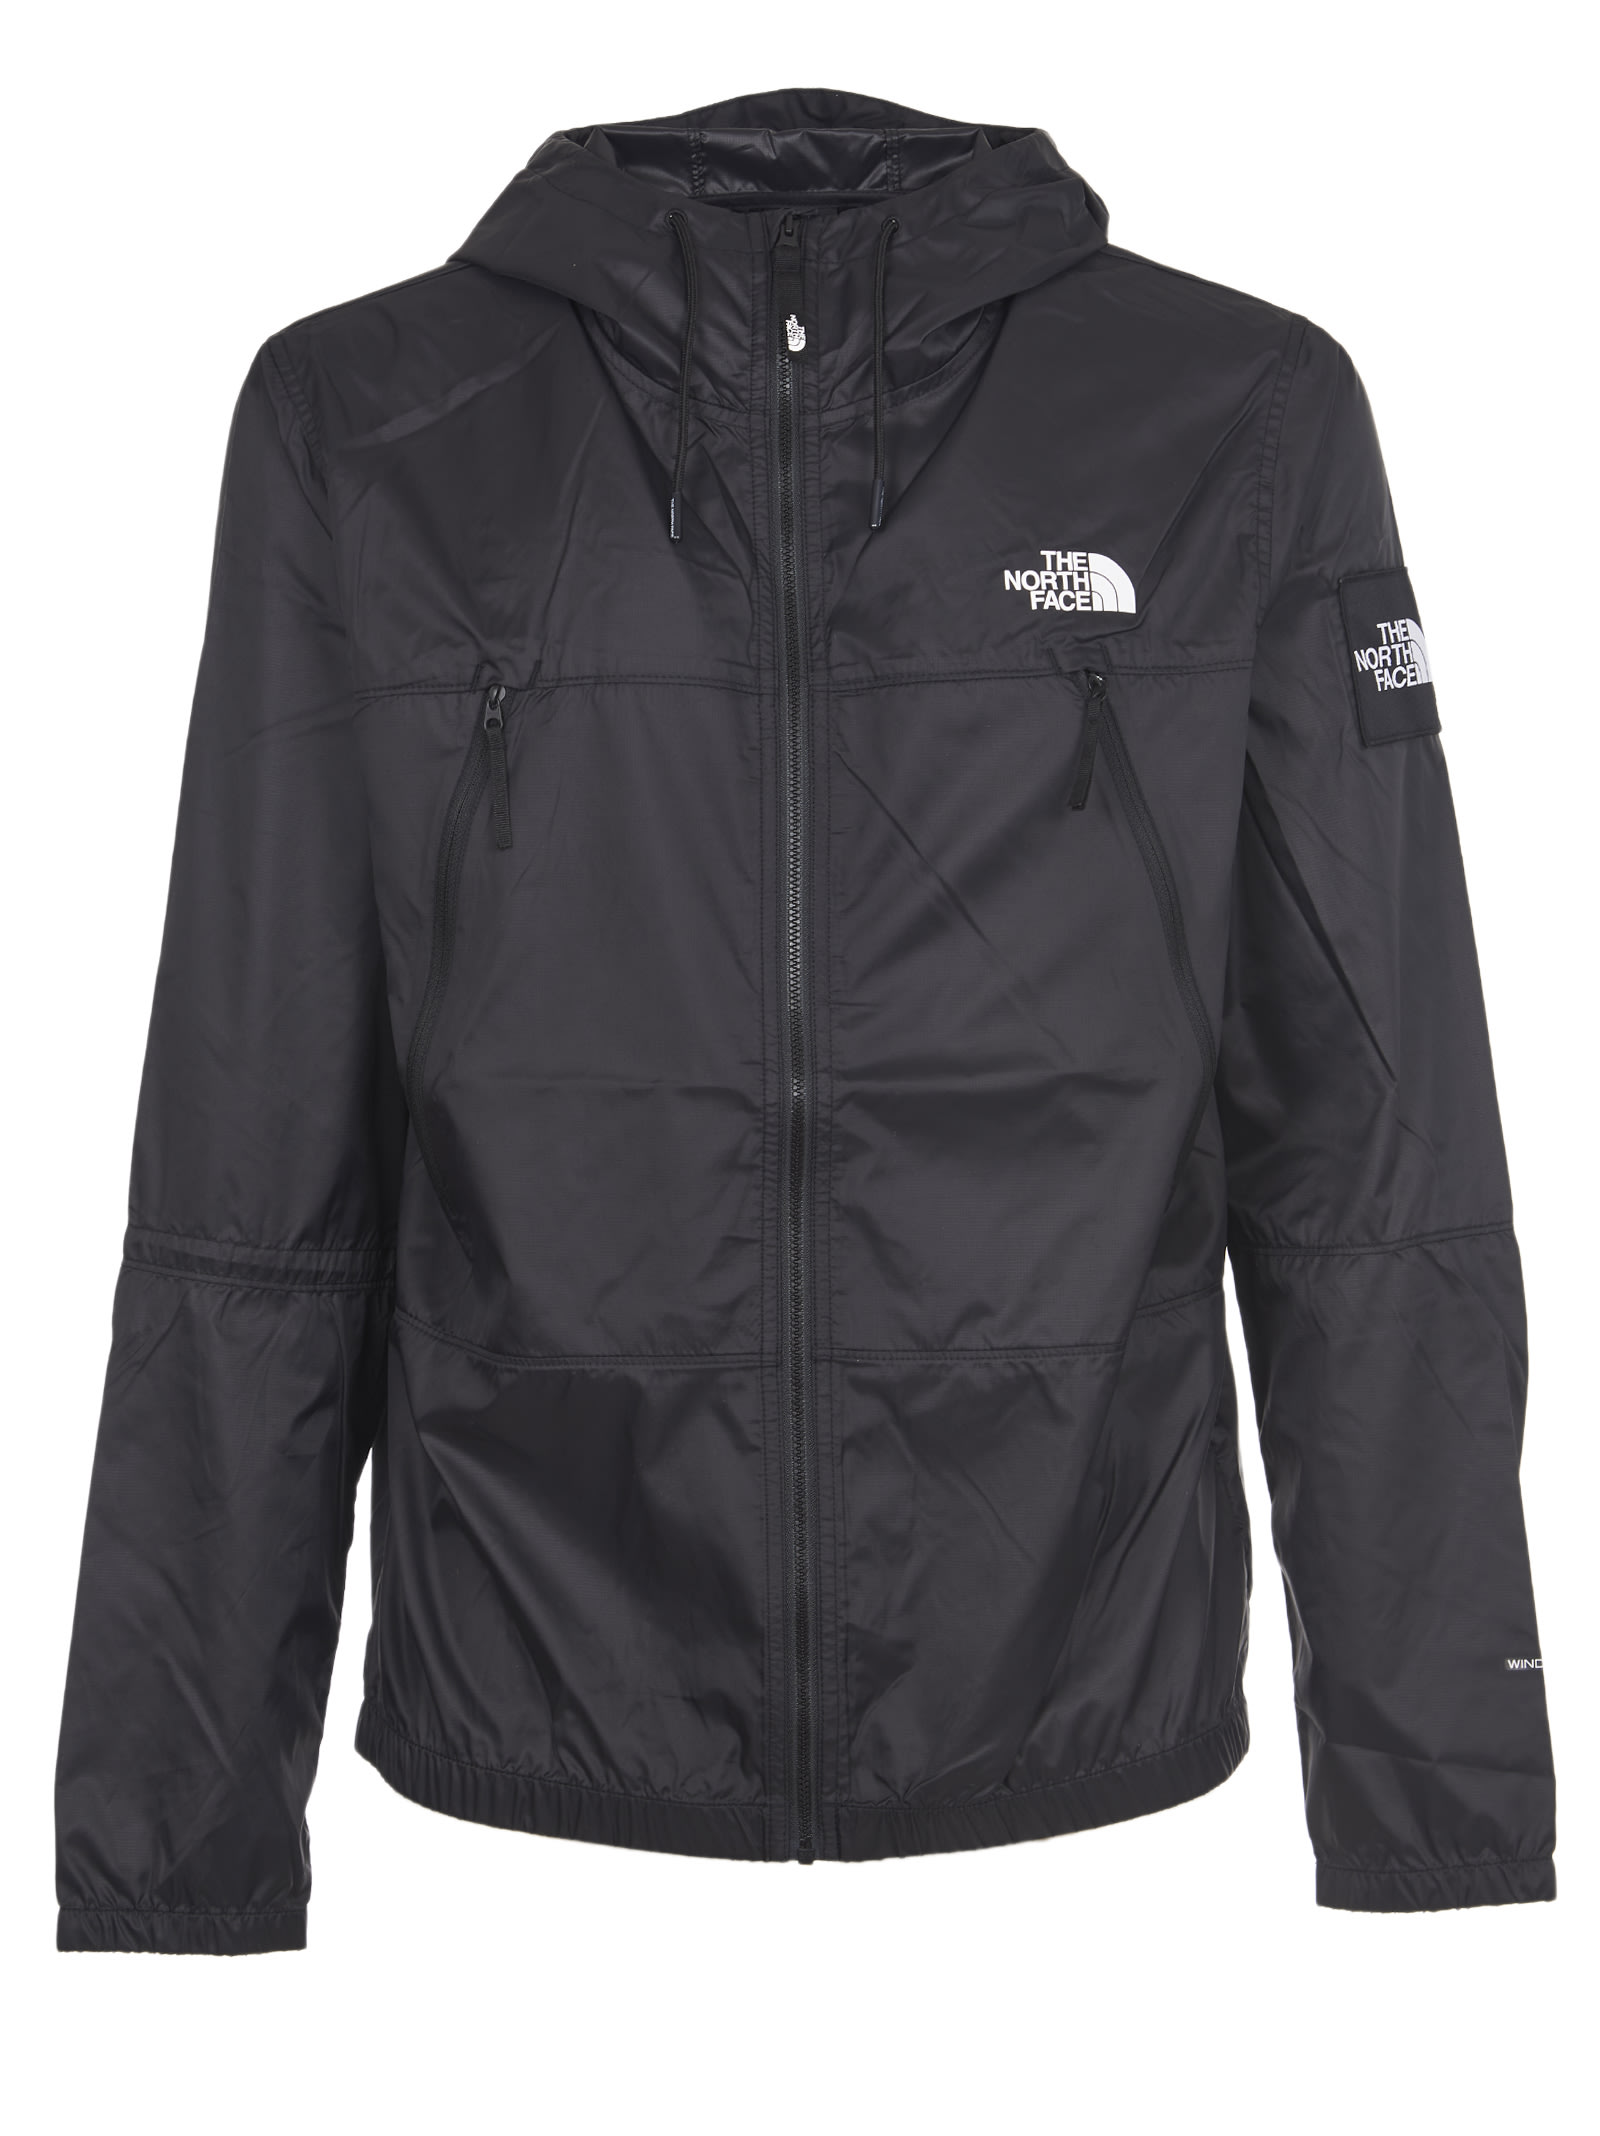 The North Face Black Mountain Jacket 1990